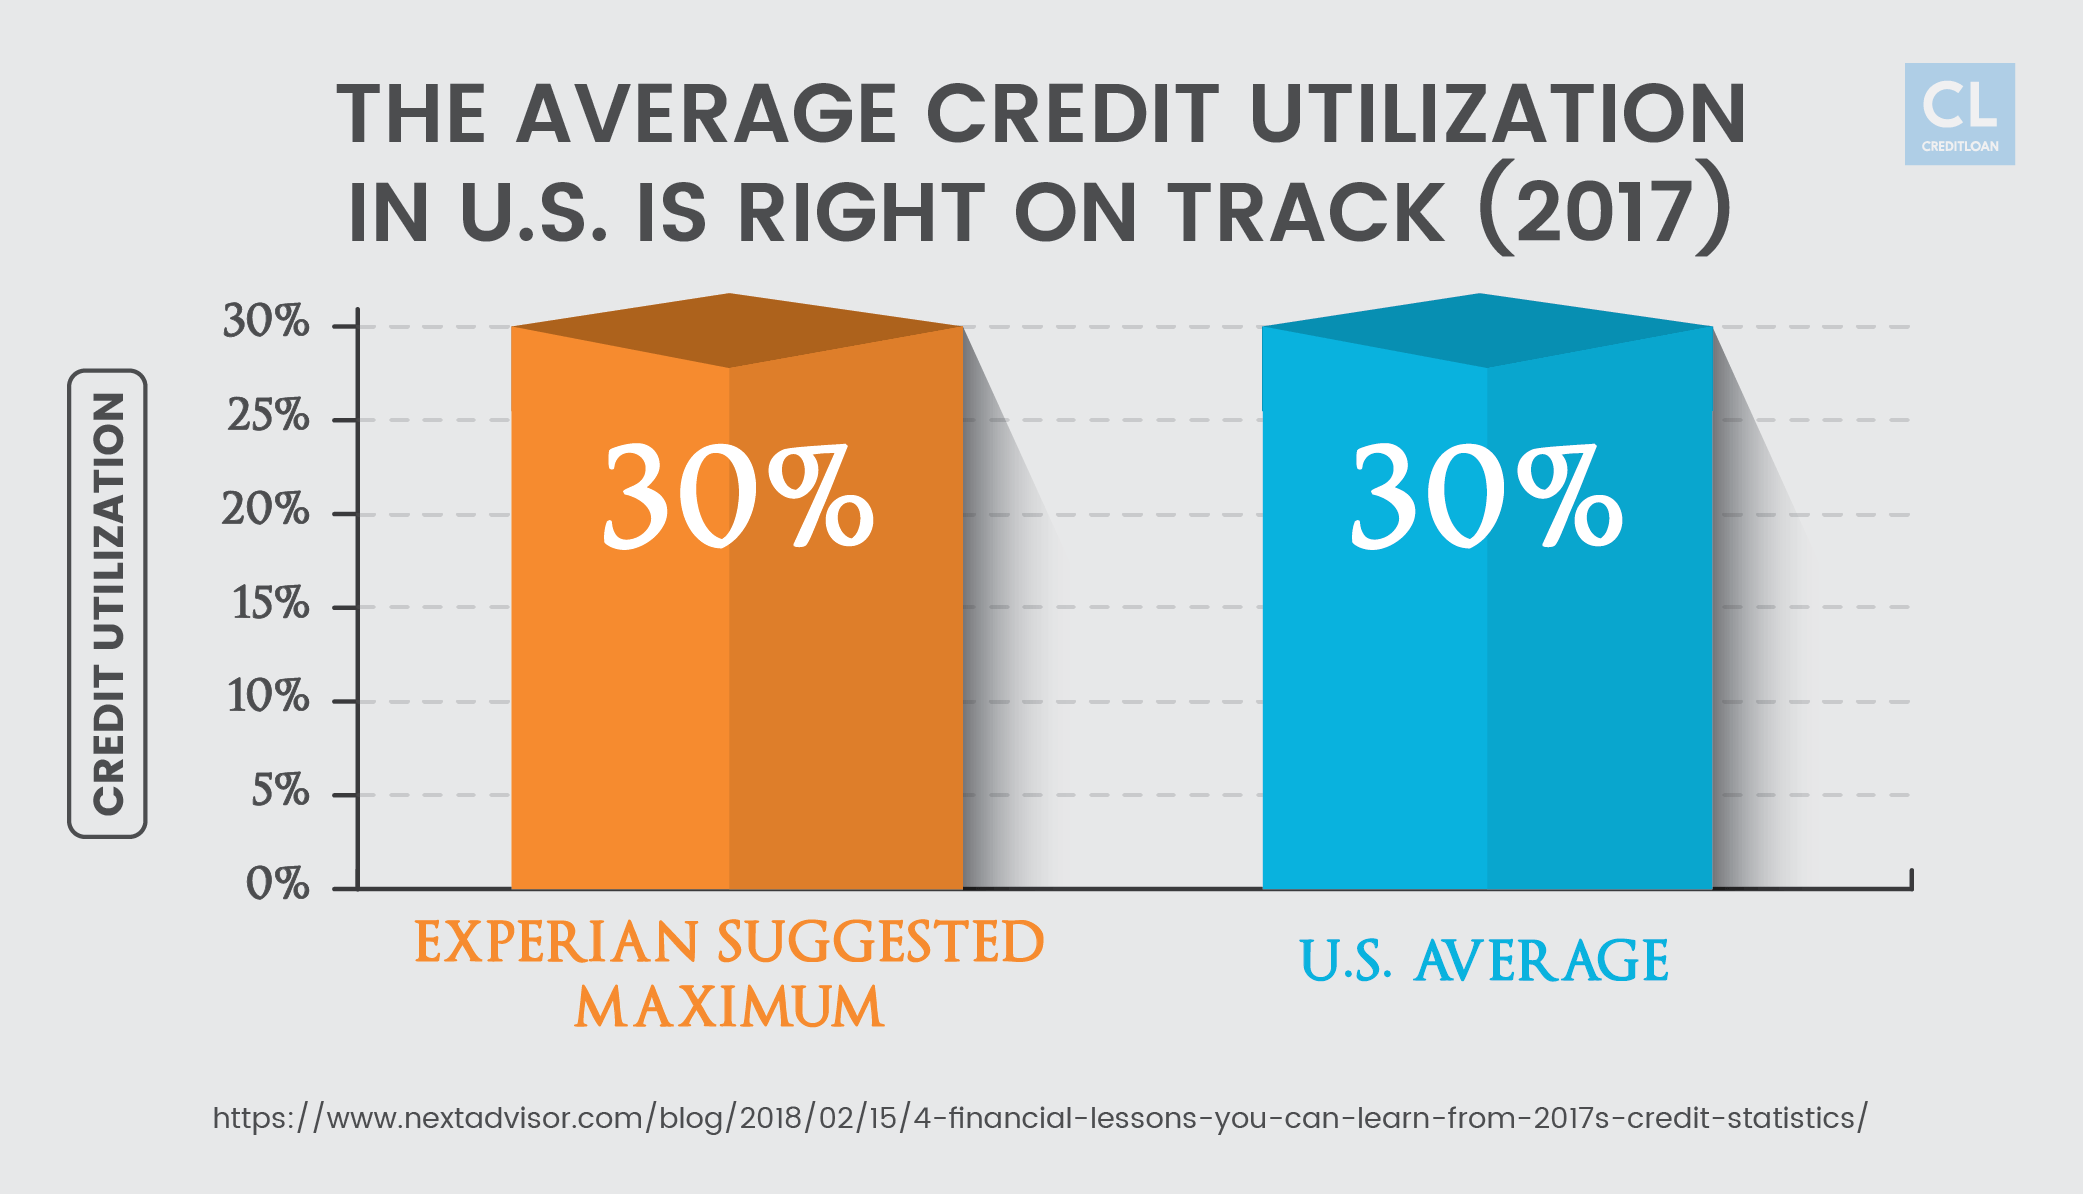 2017 U.S. Credit Utilization is Right on Track